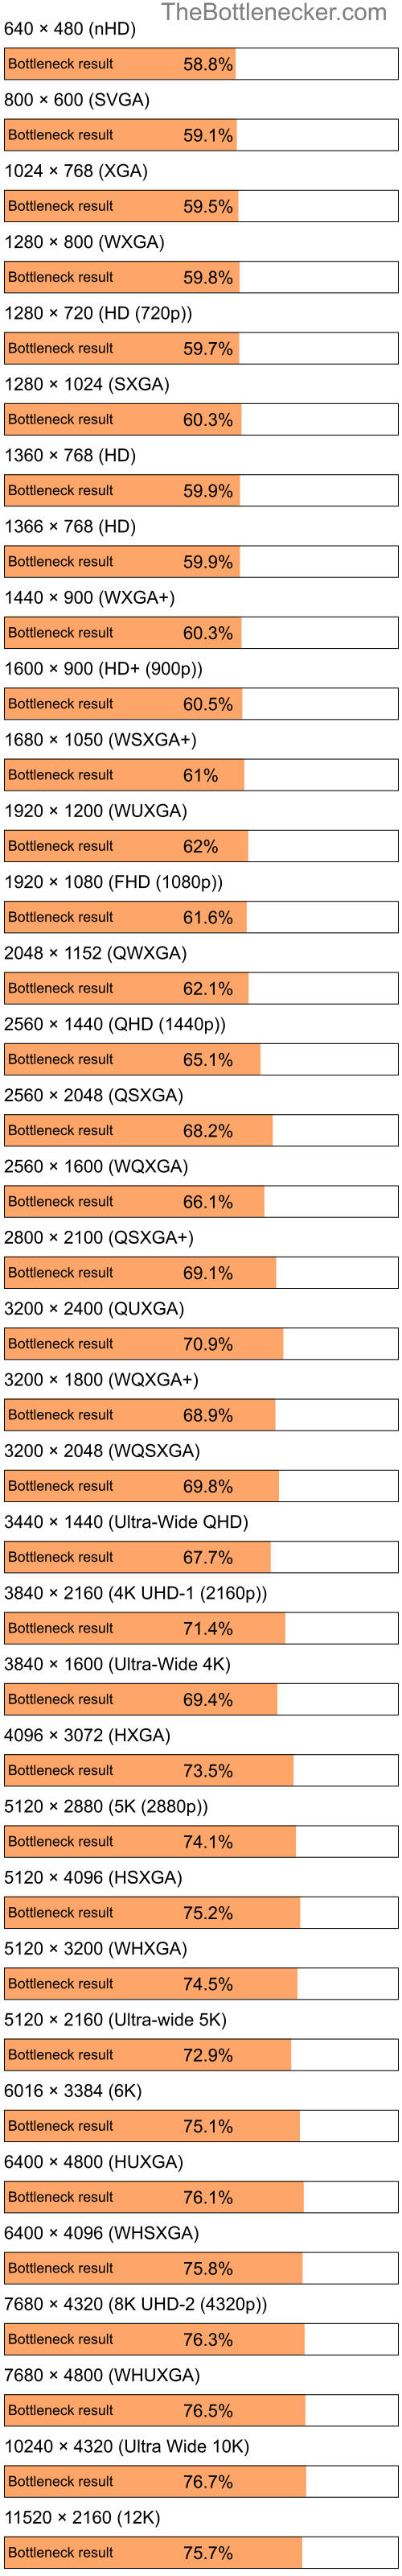 Bottleneck results by resolution for Intel Celeron and NVIDIA GeForce 6800 XT in7 Days to Die